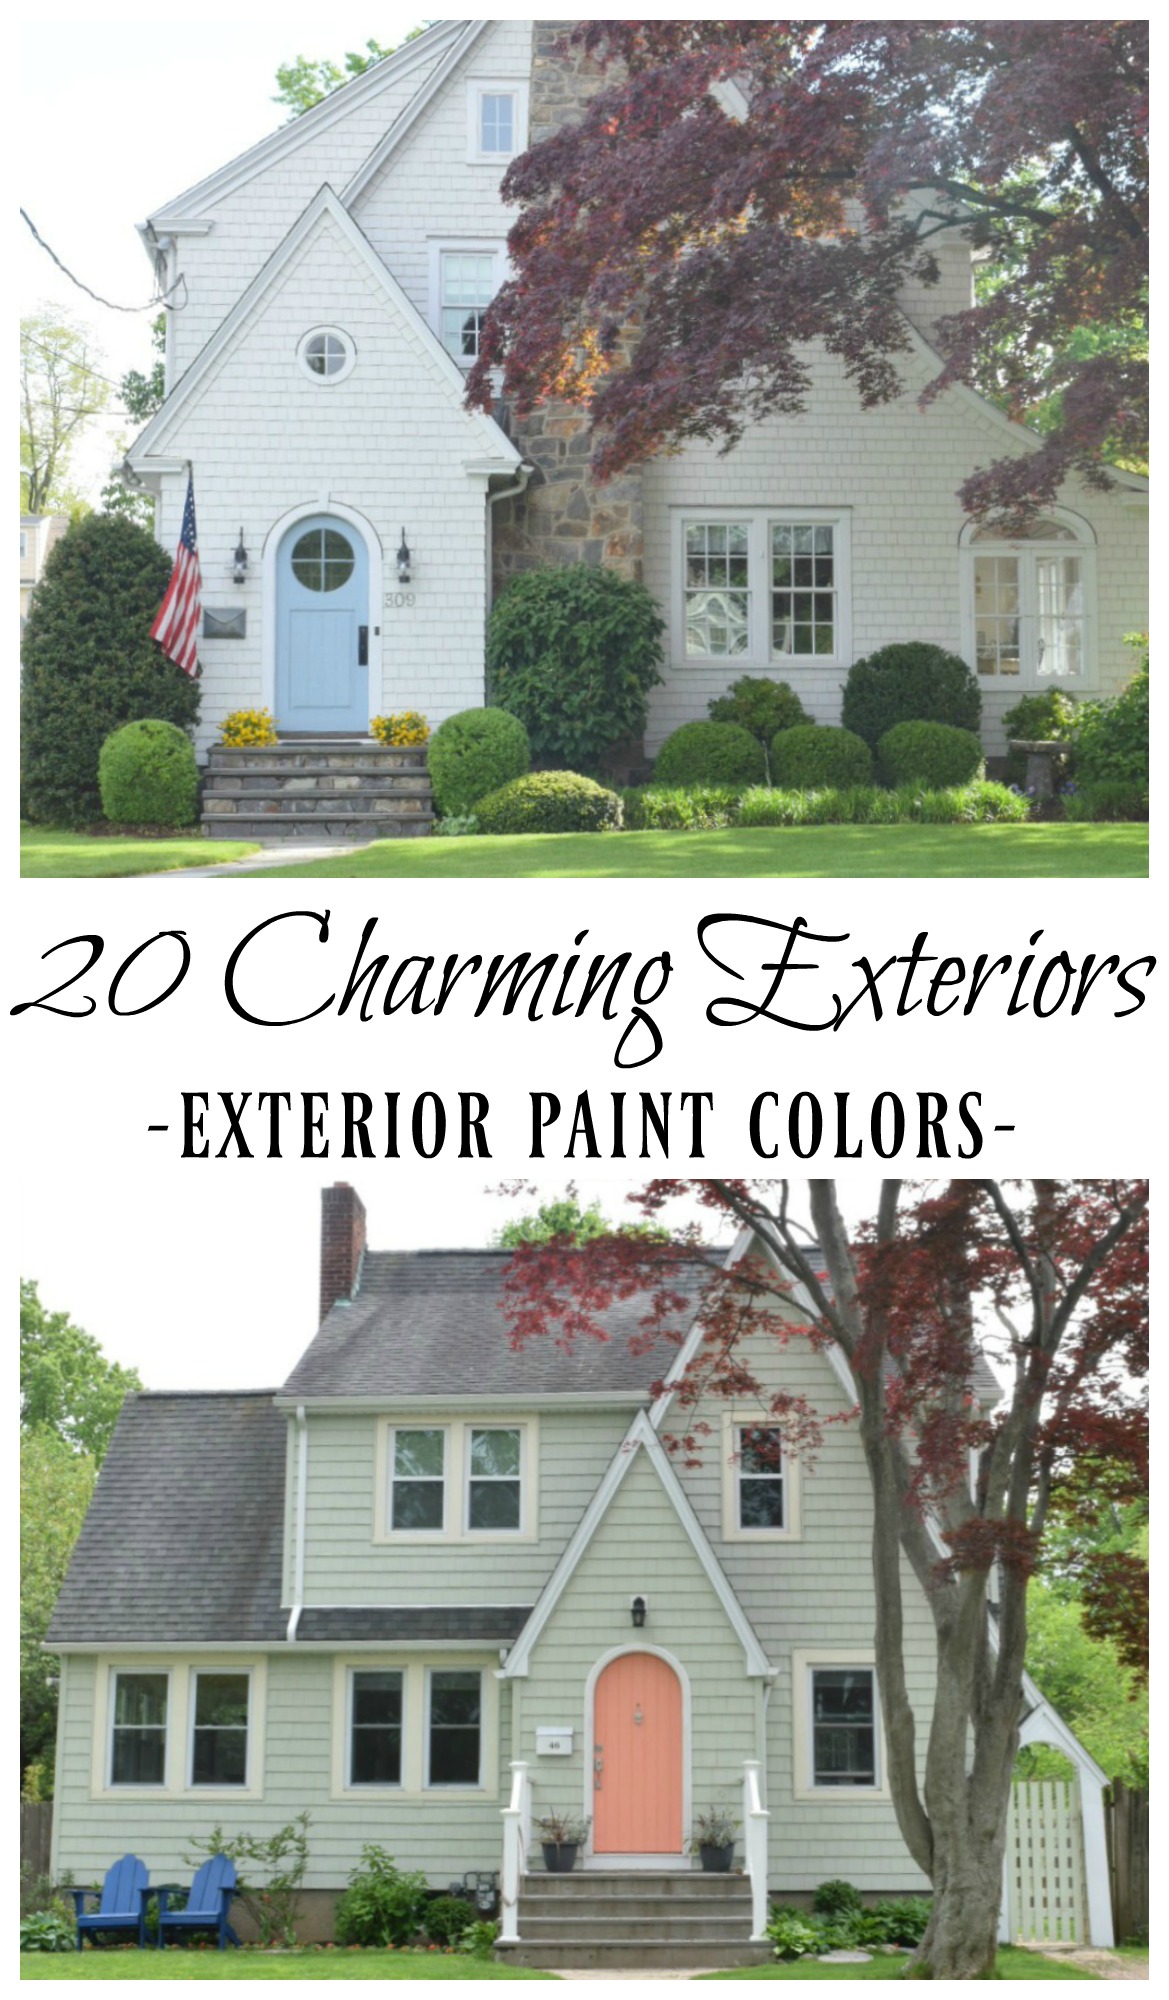 20 Charming Exteriors and Exterior Paint Colors